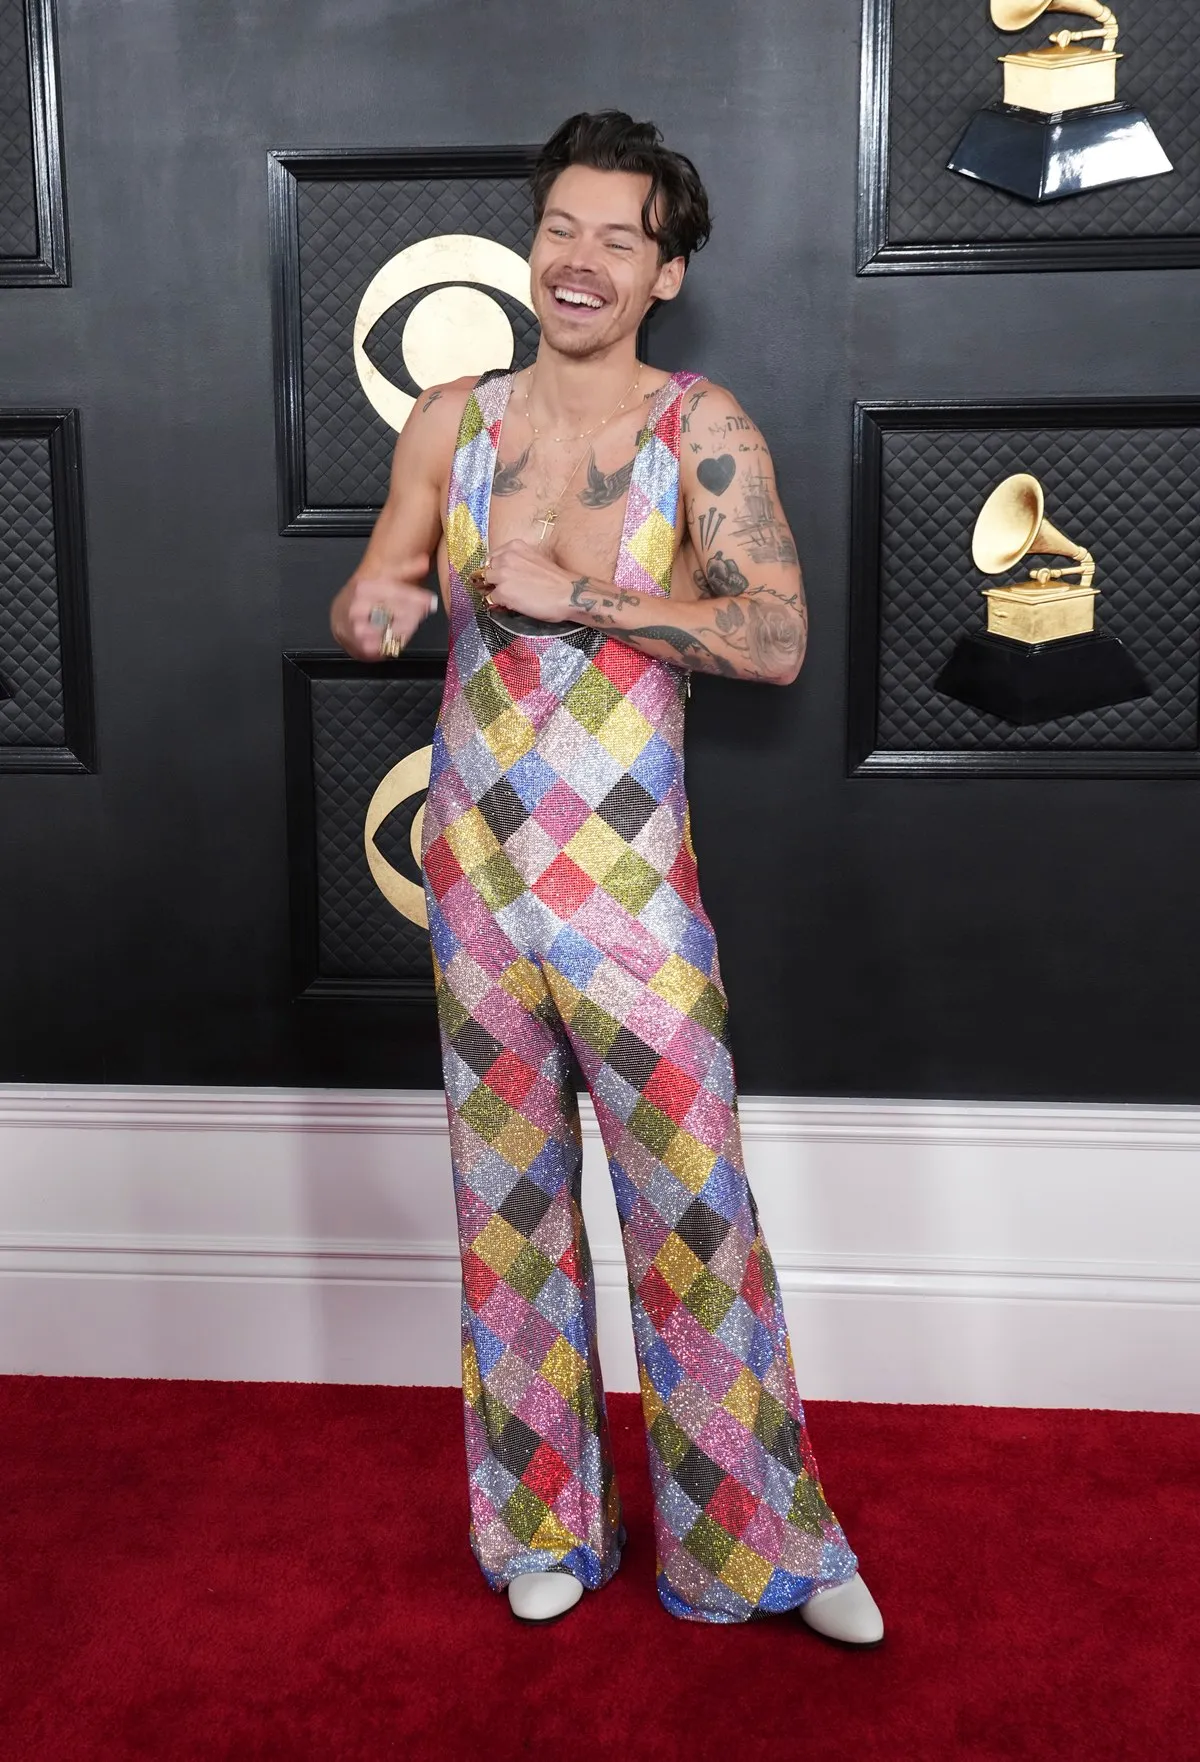 What is ‘clowncore’, the fashion aesthetic channelled by Harry Styles